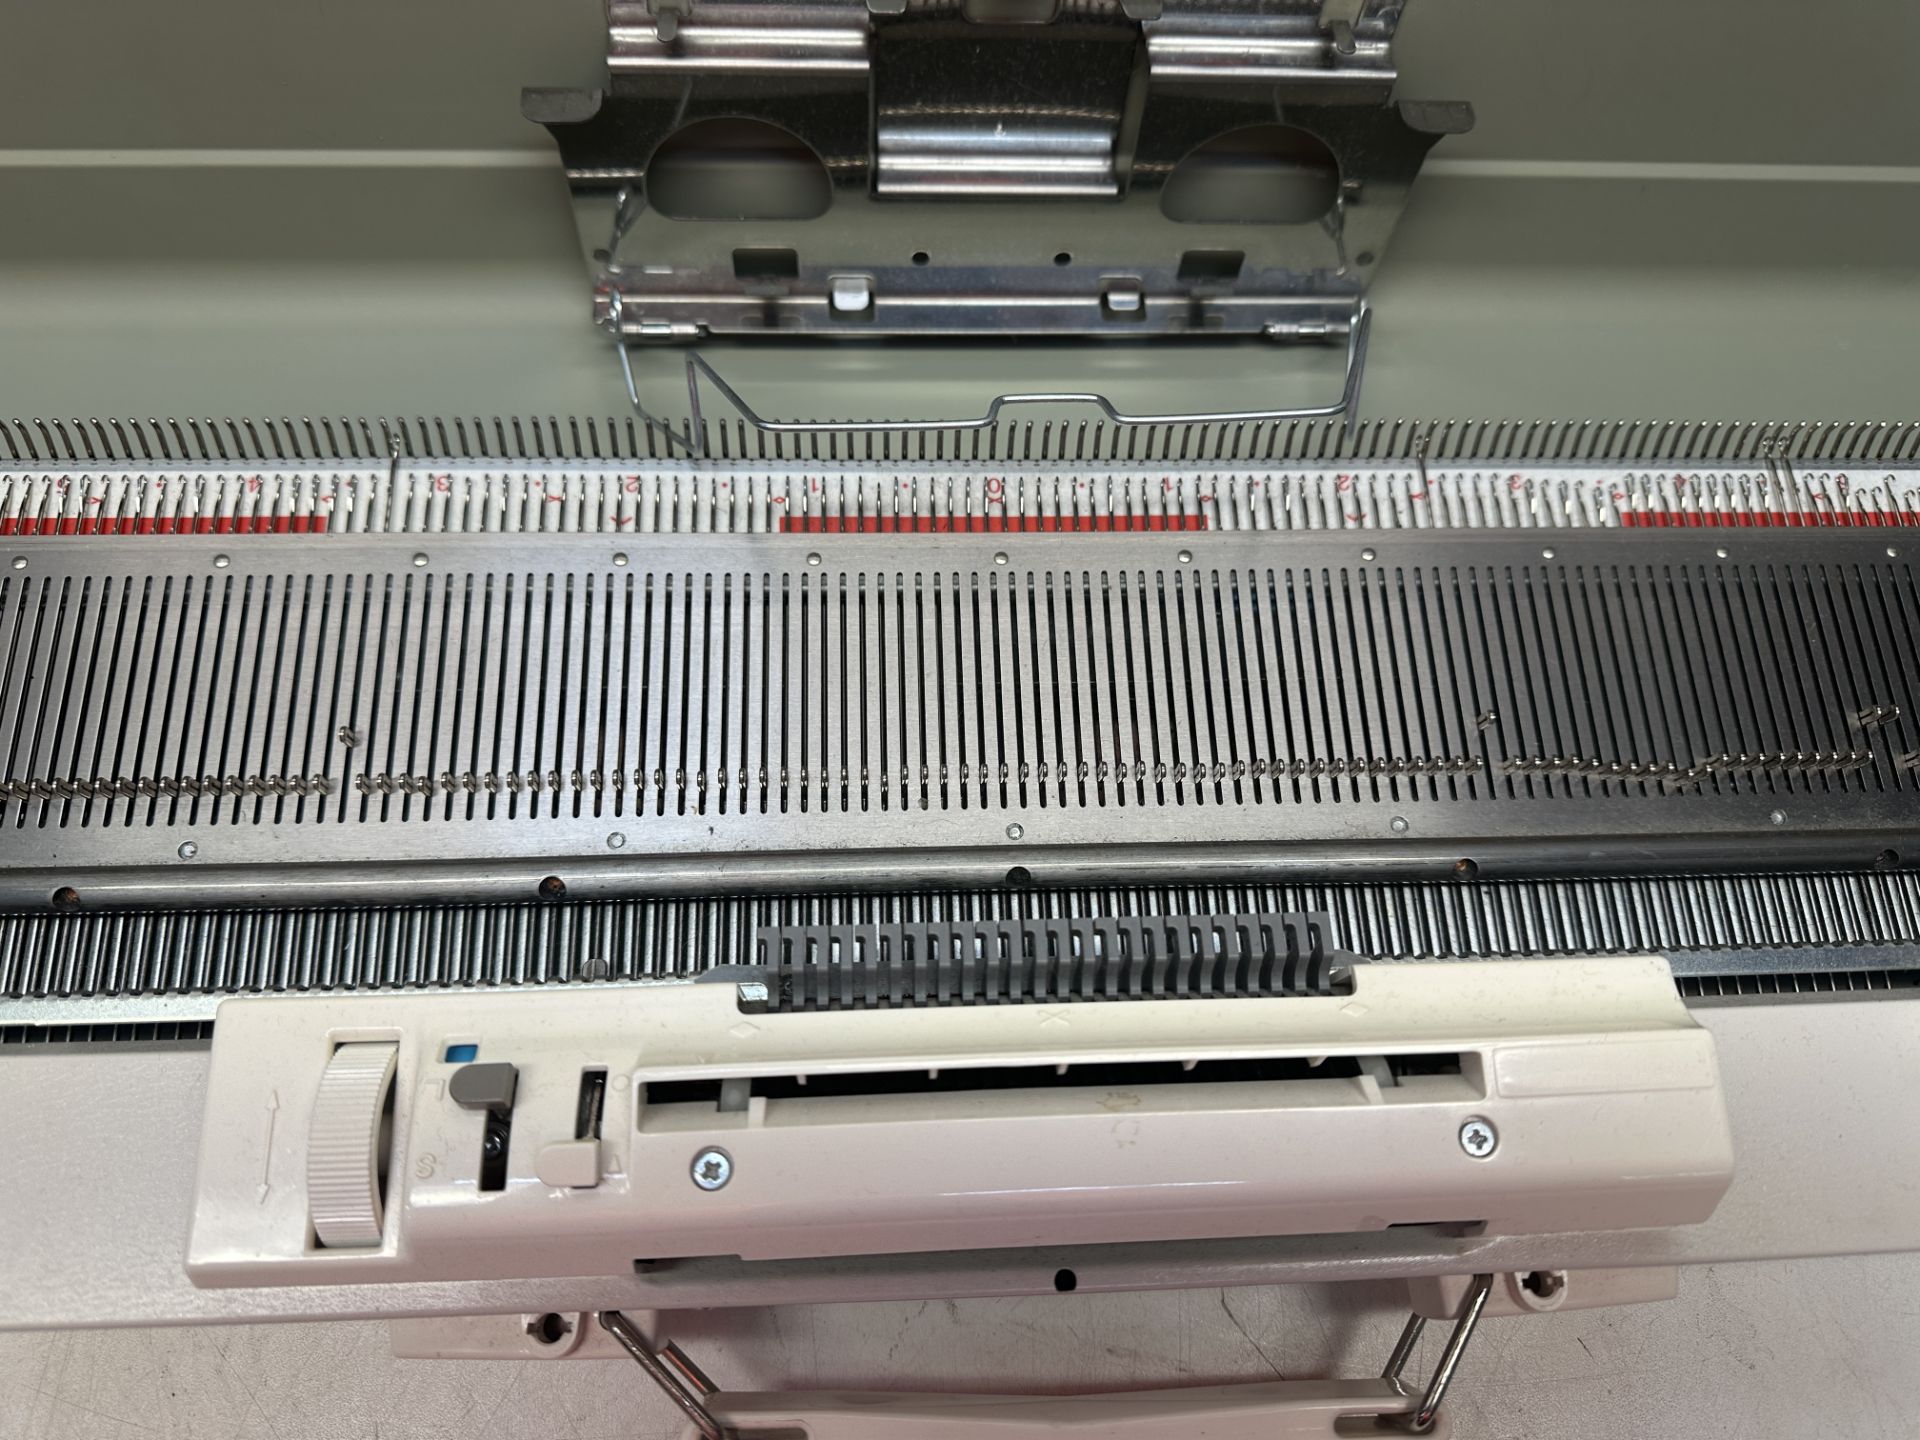 Silver Reed SK 280 Knitting Machine - Image 2 of 10